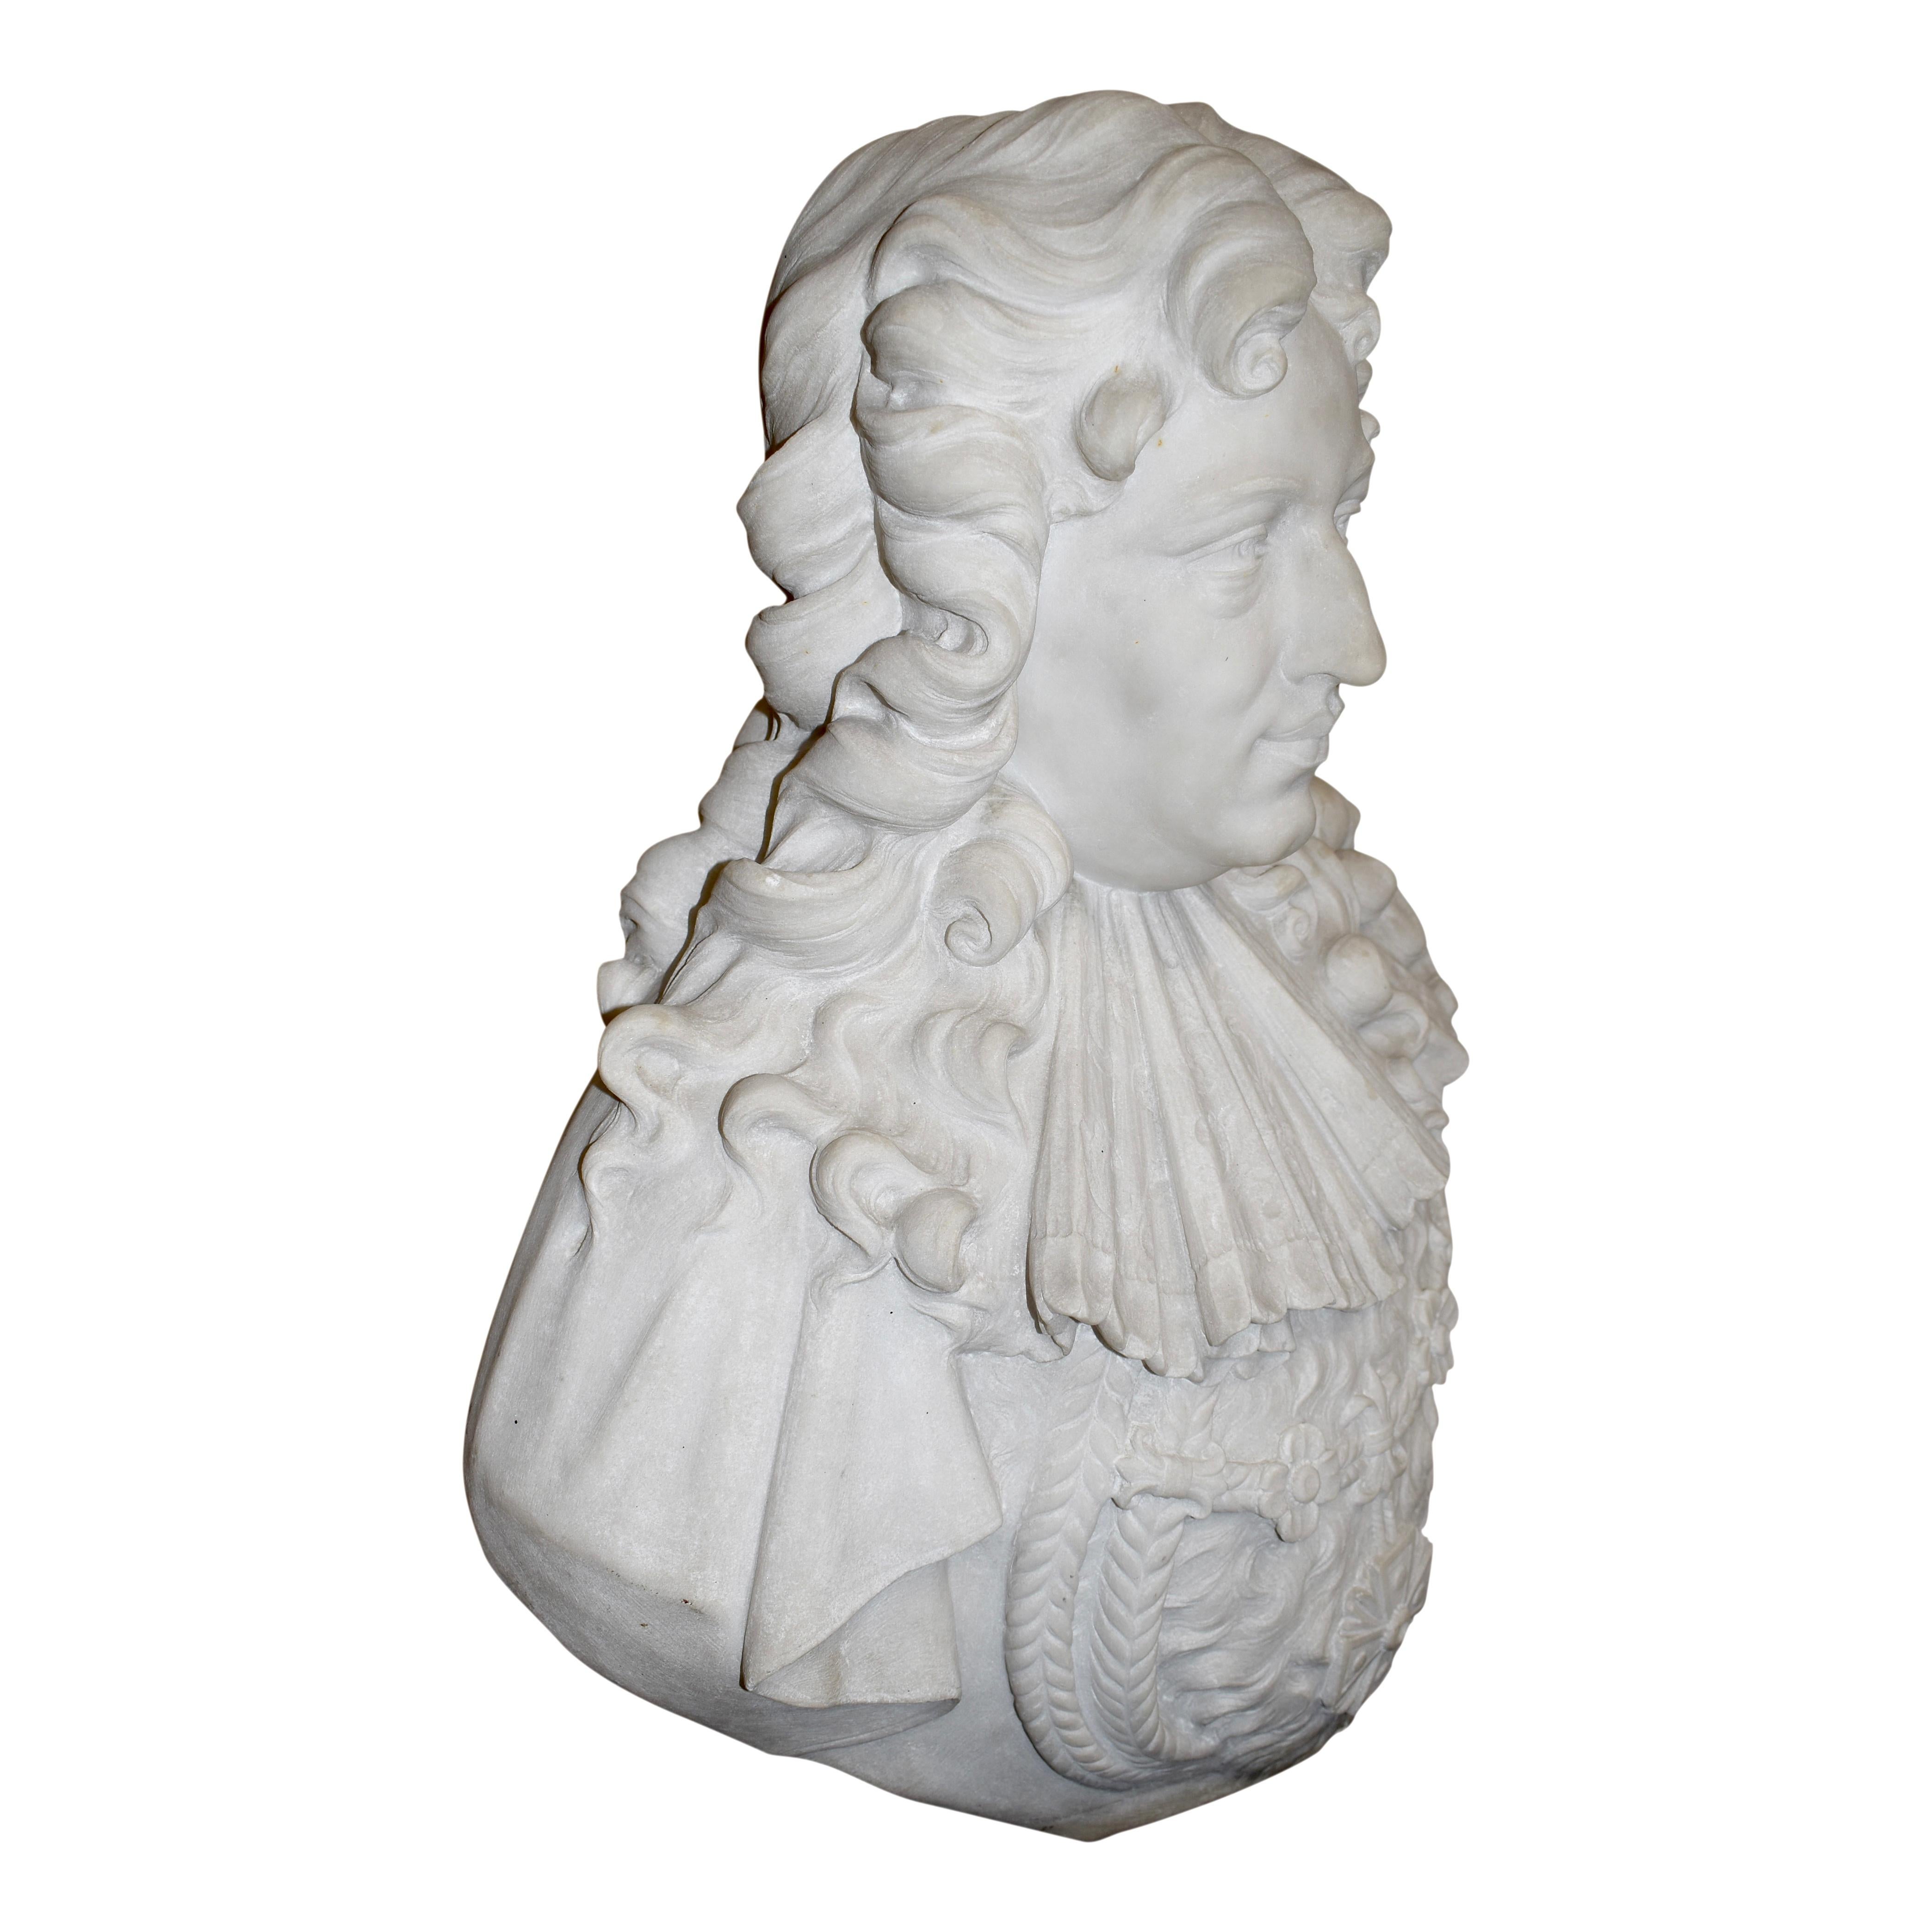 Known as the Sun King, Louis XIV, was the longest reigning monarch in Europe. His reign in France was marked as a time of unparalleled prosperity and French domination. With rich detail, this marble bust depicts him in regal attire, ringlets falling